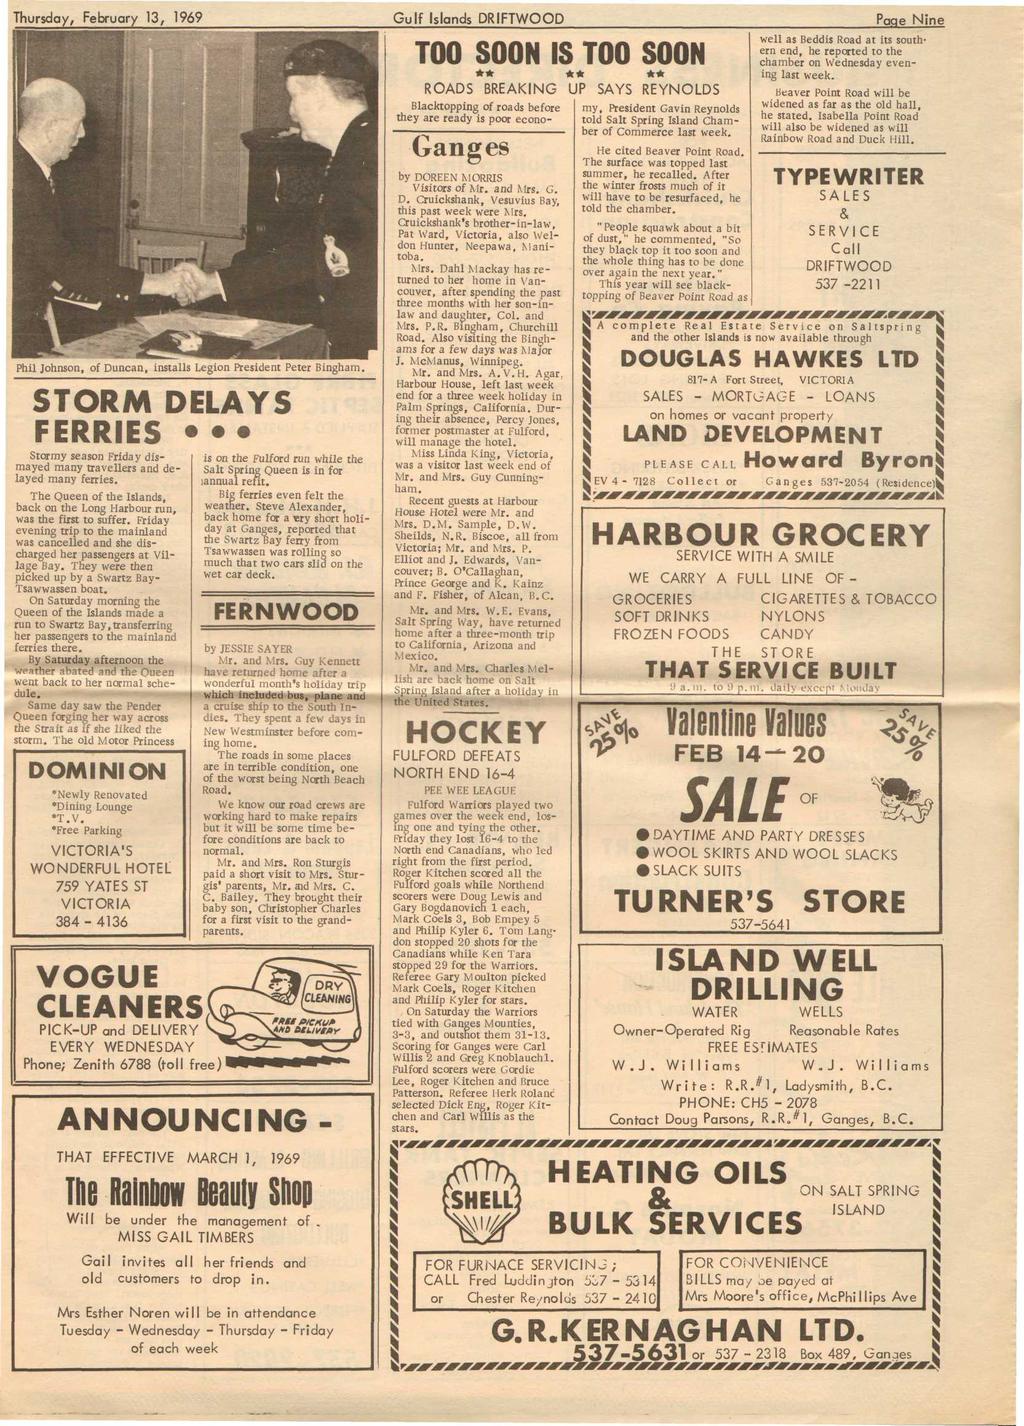 Thursday, February 13, 1969 Gulf Islands DRIFTWOOD Page Nine Phil Johnson, of Duncan, installs Legion President Peter Bingham STORM DELAYS FERRIES Stormy season Friday dismayed many travellers and